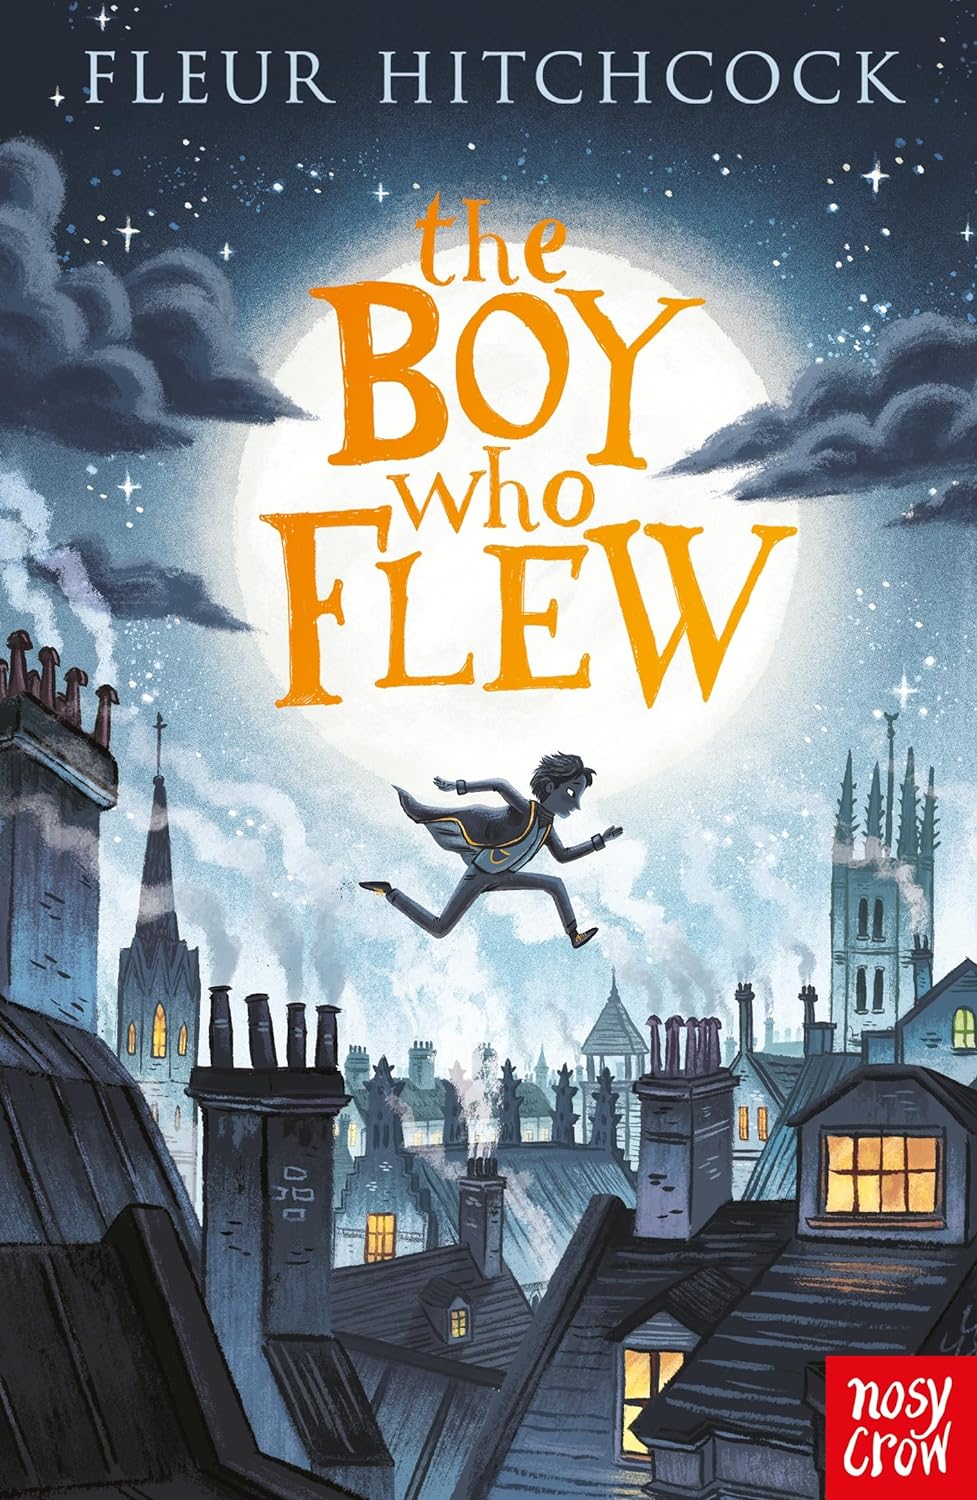 Discovering the boy who flew by Fleur Hitchcock, a neurodiverse protagonist who is disabled.